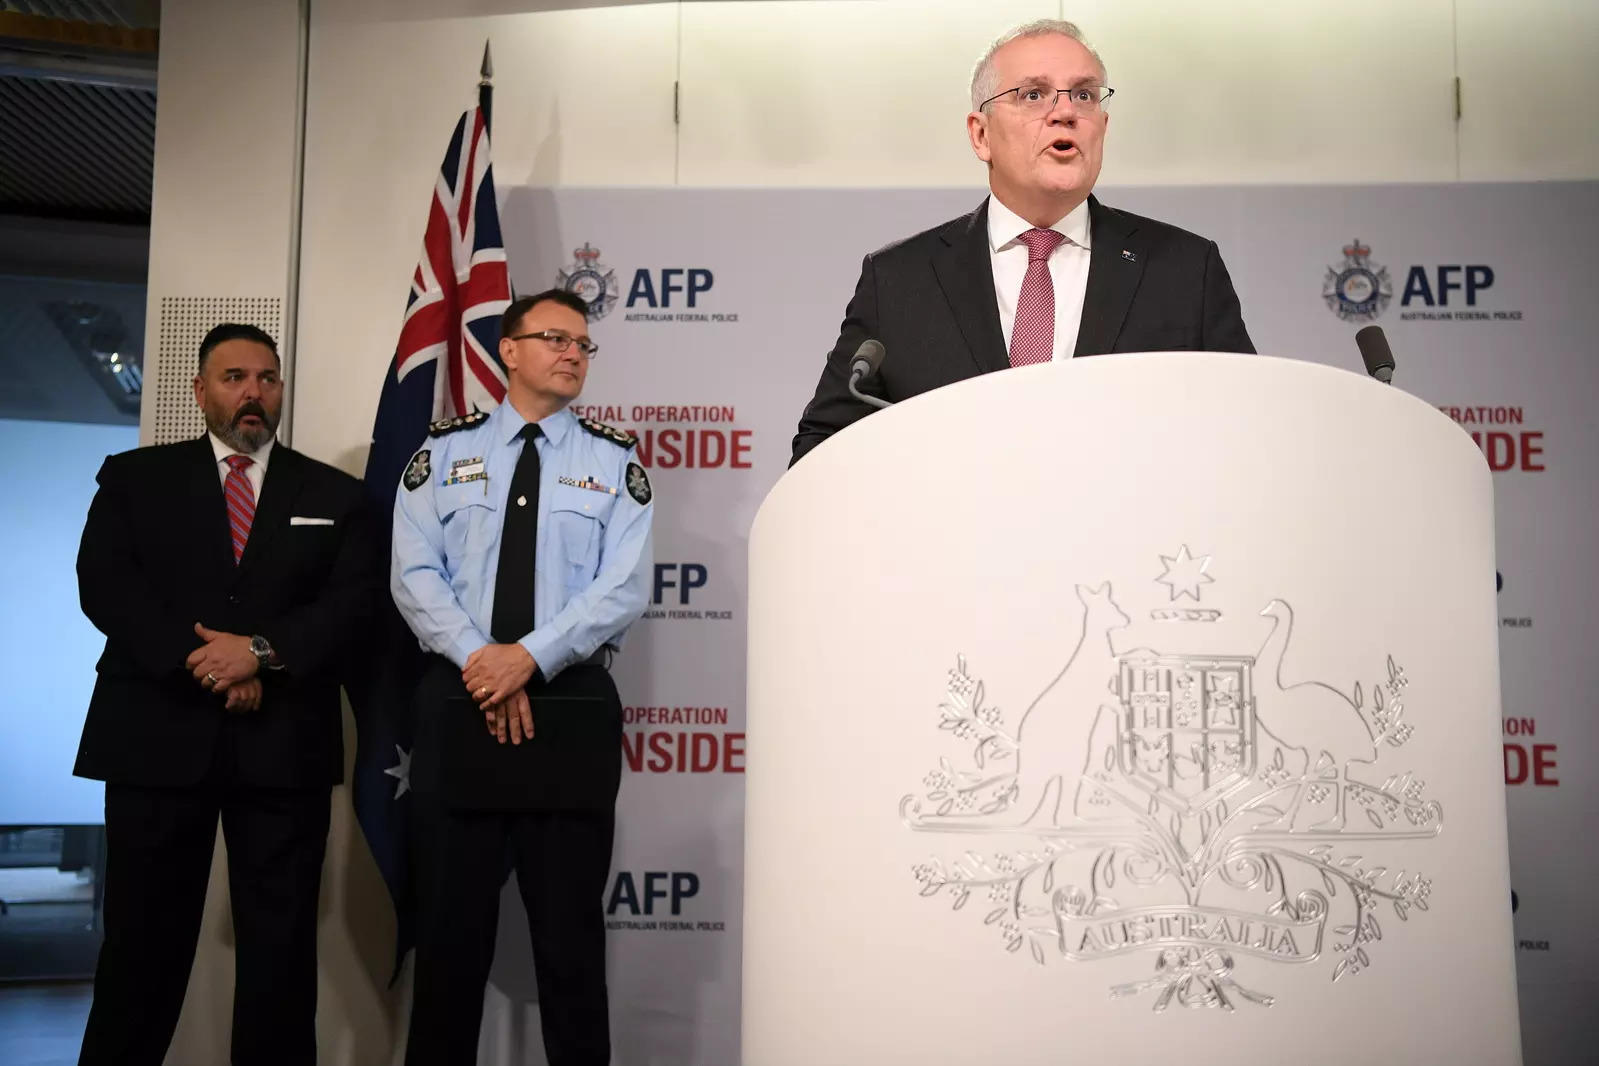 Australian Prime Minister Scott Morrison speaks during a media briefing about Operation Ironside, which disrupted organised crime internationally, as U.S. Embassy's FBI Legal Attaché Anthony Russo, (L) and Australian Federal Police (AFP) Commissioner Reece Kershaw (C) look on in Sydney